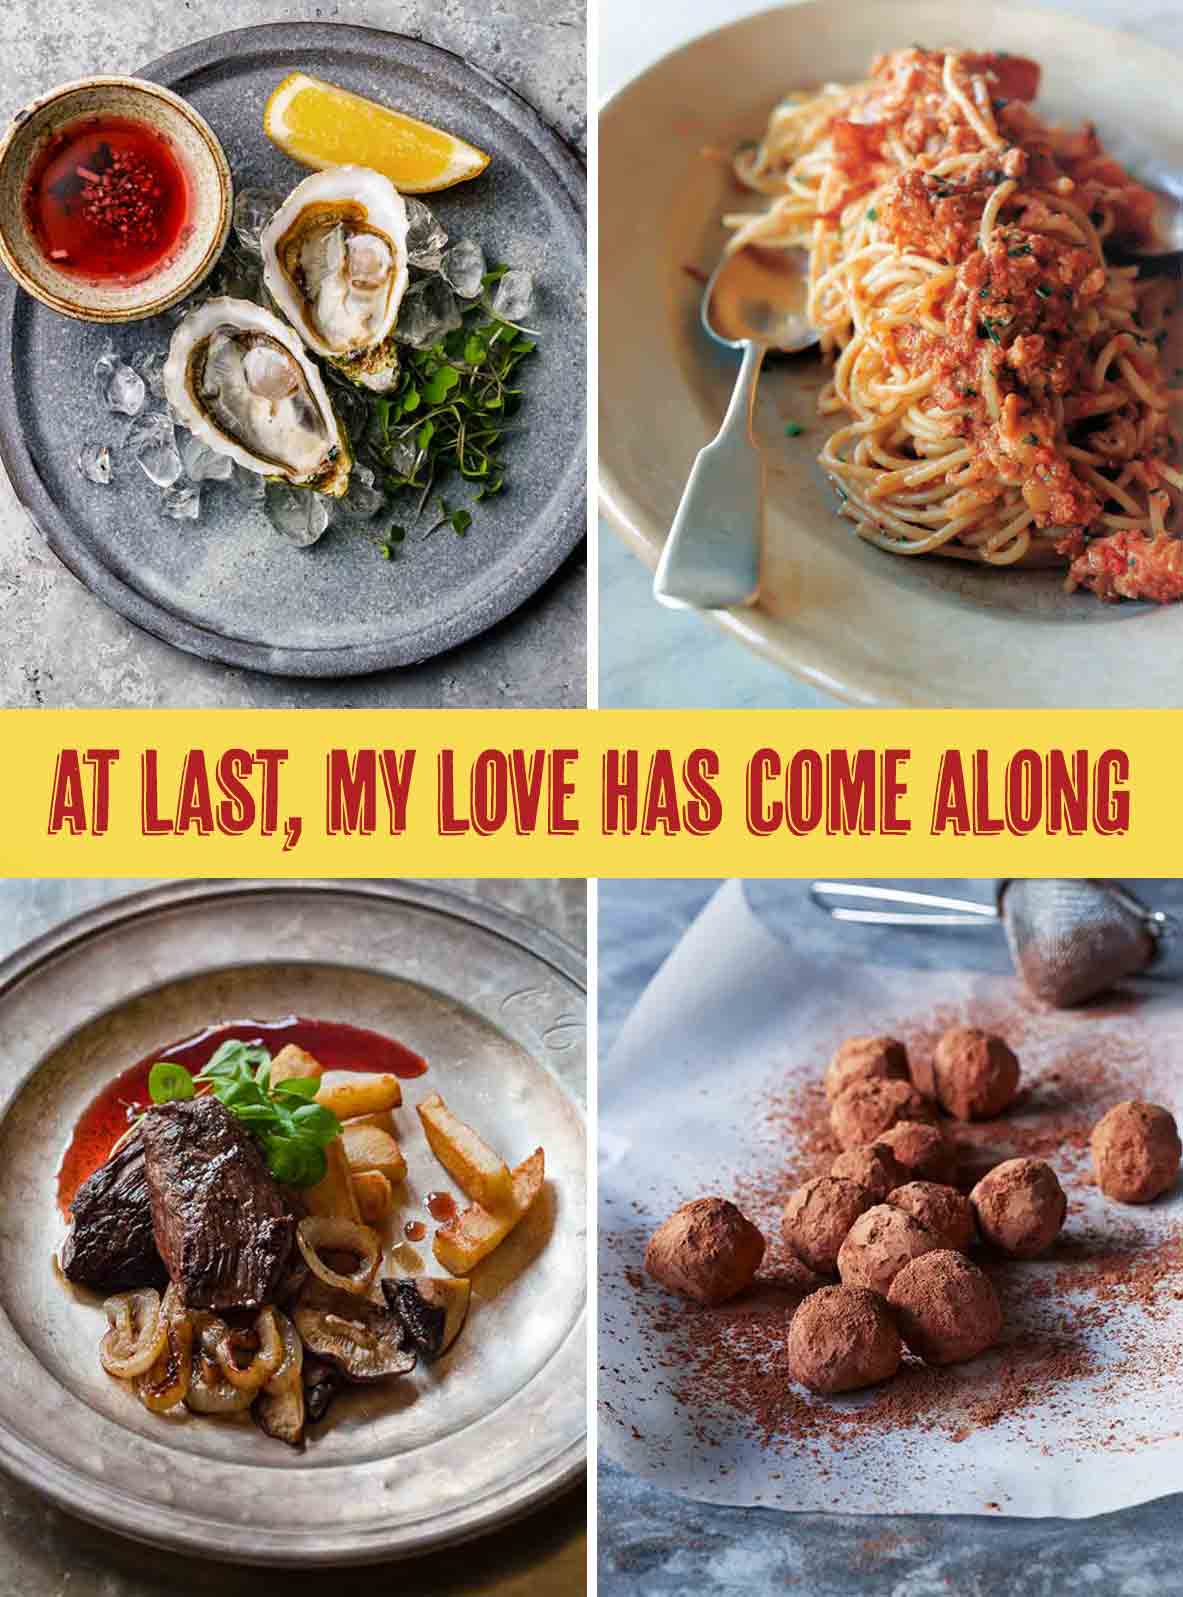 Images of Valentine's day food--A plate of oysters, a bowl of pasta, steak frites, and chocolate truffles.